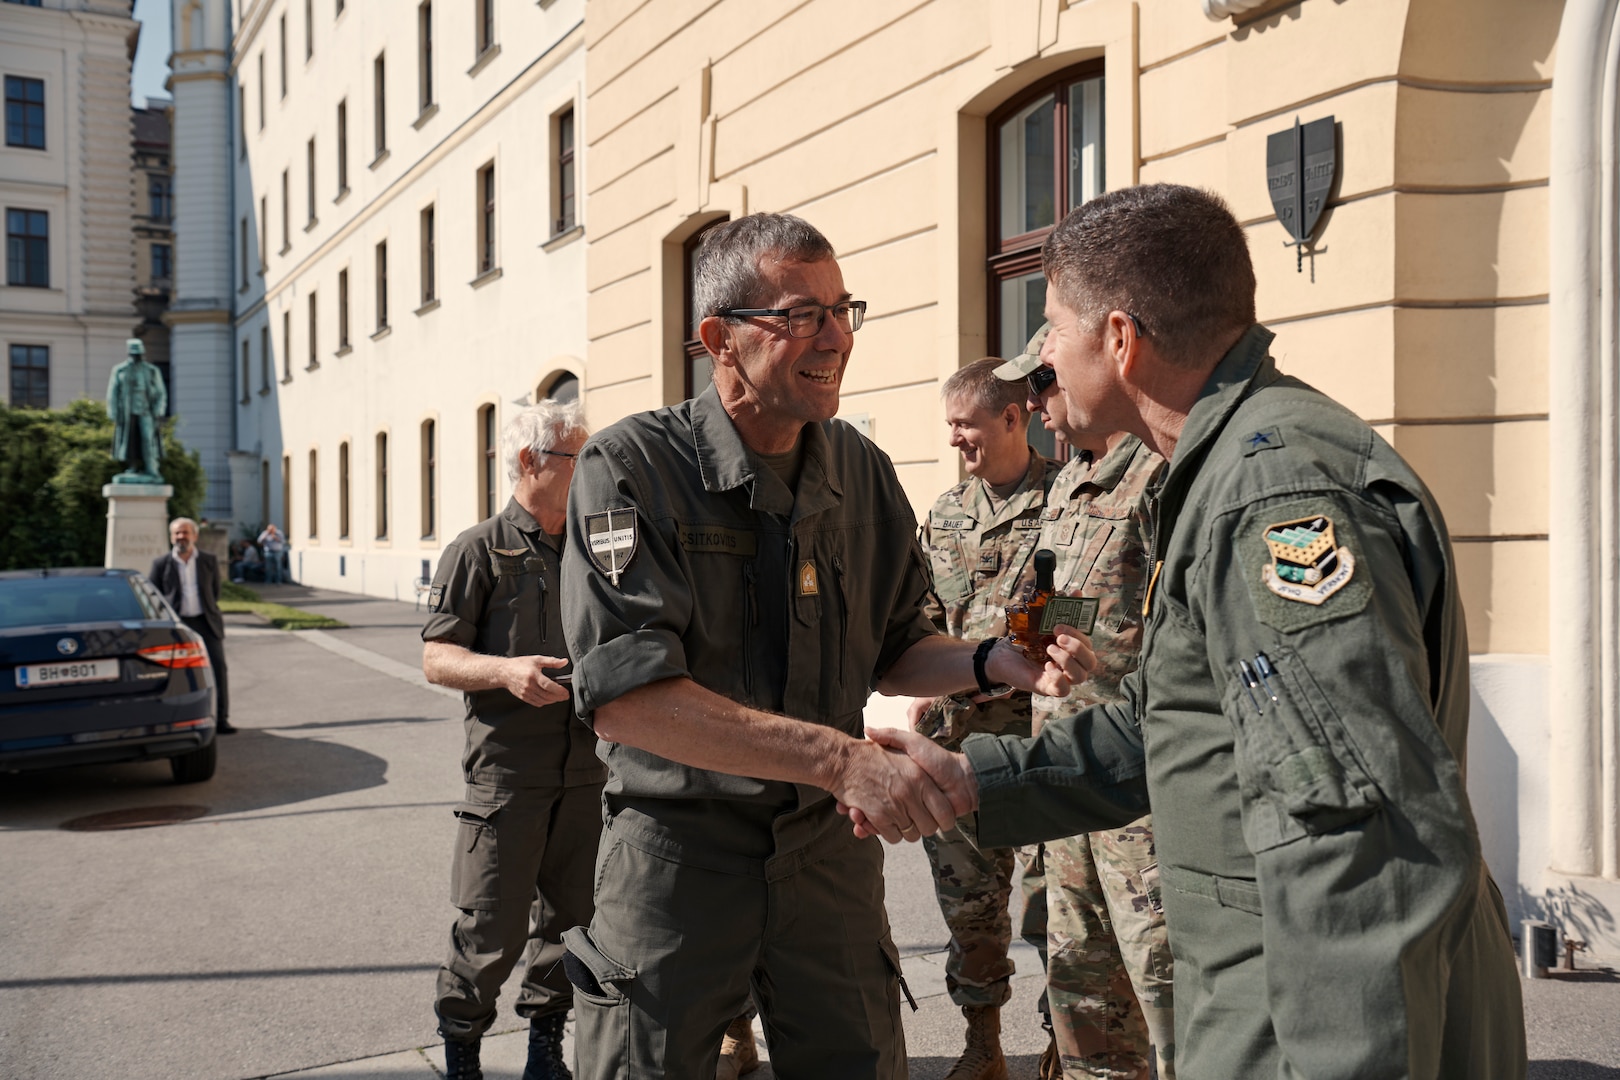 Photo of Commandant of the Austrian Defense Academy Lt. Gen. Erich Csitkovits being gifted Vermont maple syrup as a symbol of friendship by Air Component Commander of the Vermont National Guard, Brig. Gen. Henry Harder, after holding a meeting at the Austrian Defense Academy to discuss cooperation between the Austrian Armed Forces and the Vermont National Guard, Vienna, Austria, June 15, 2023.